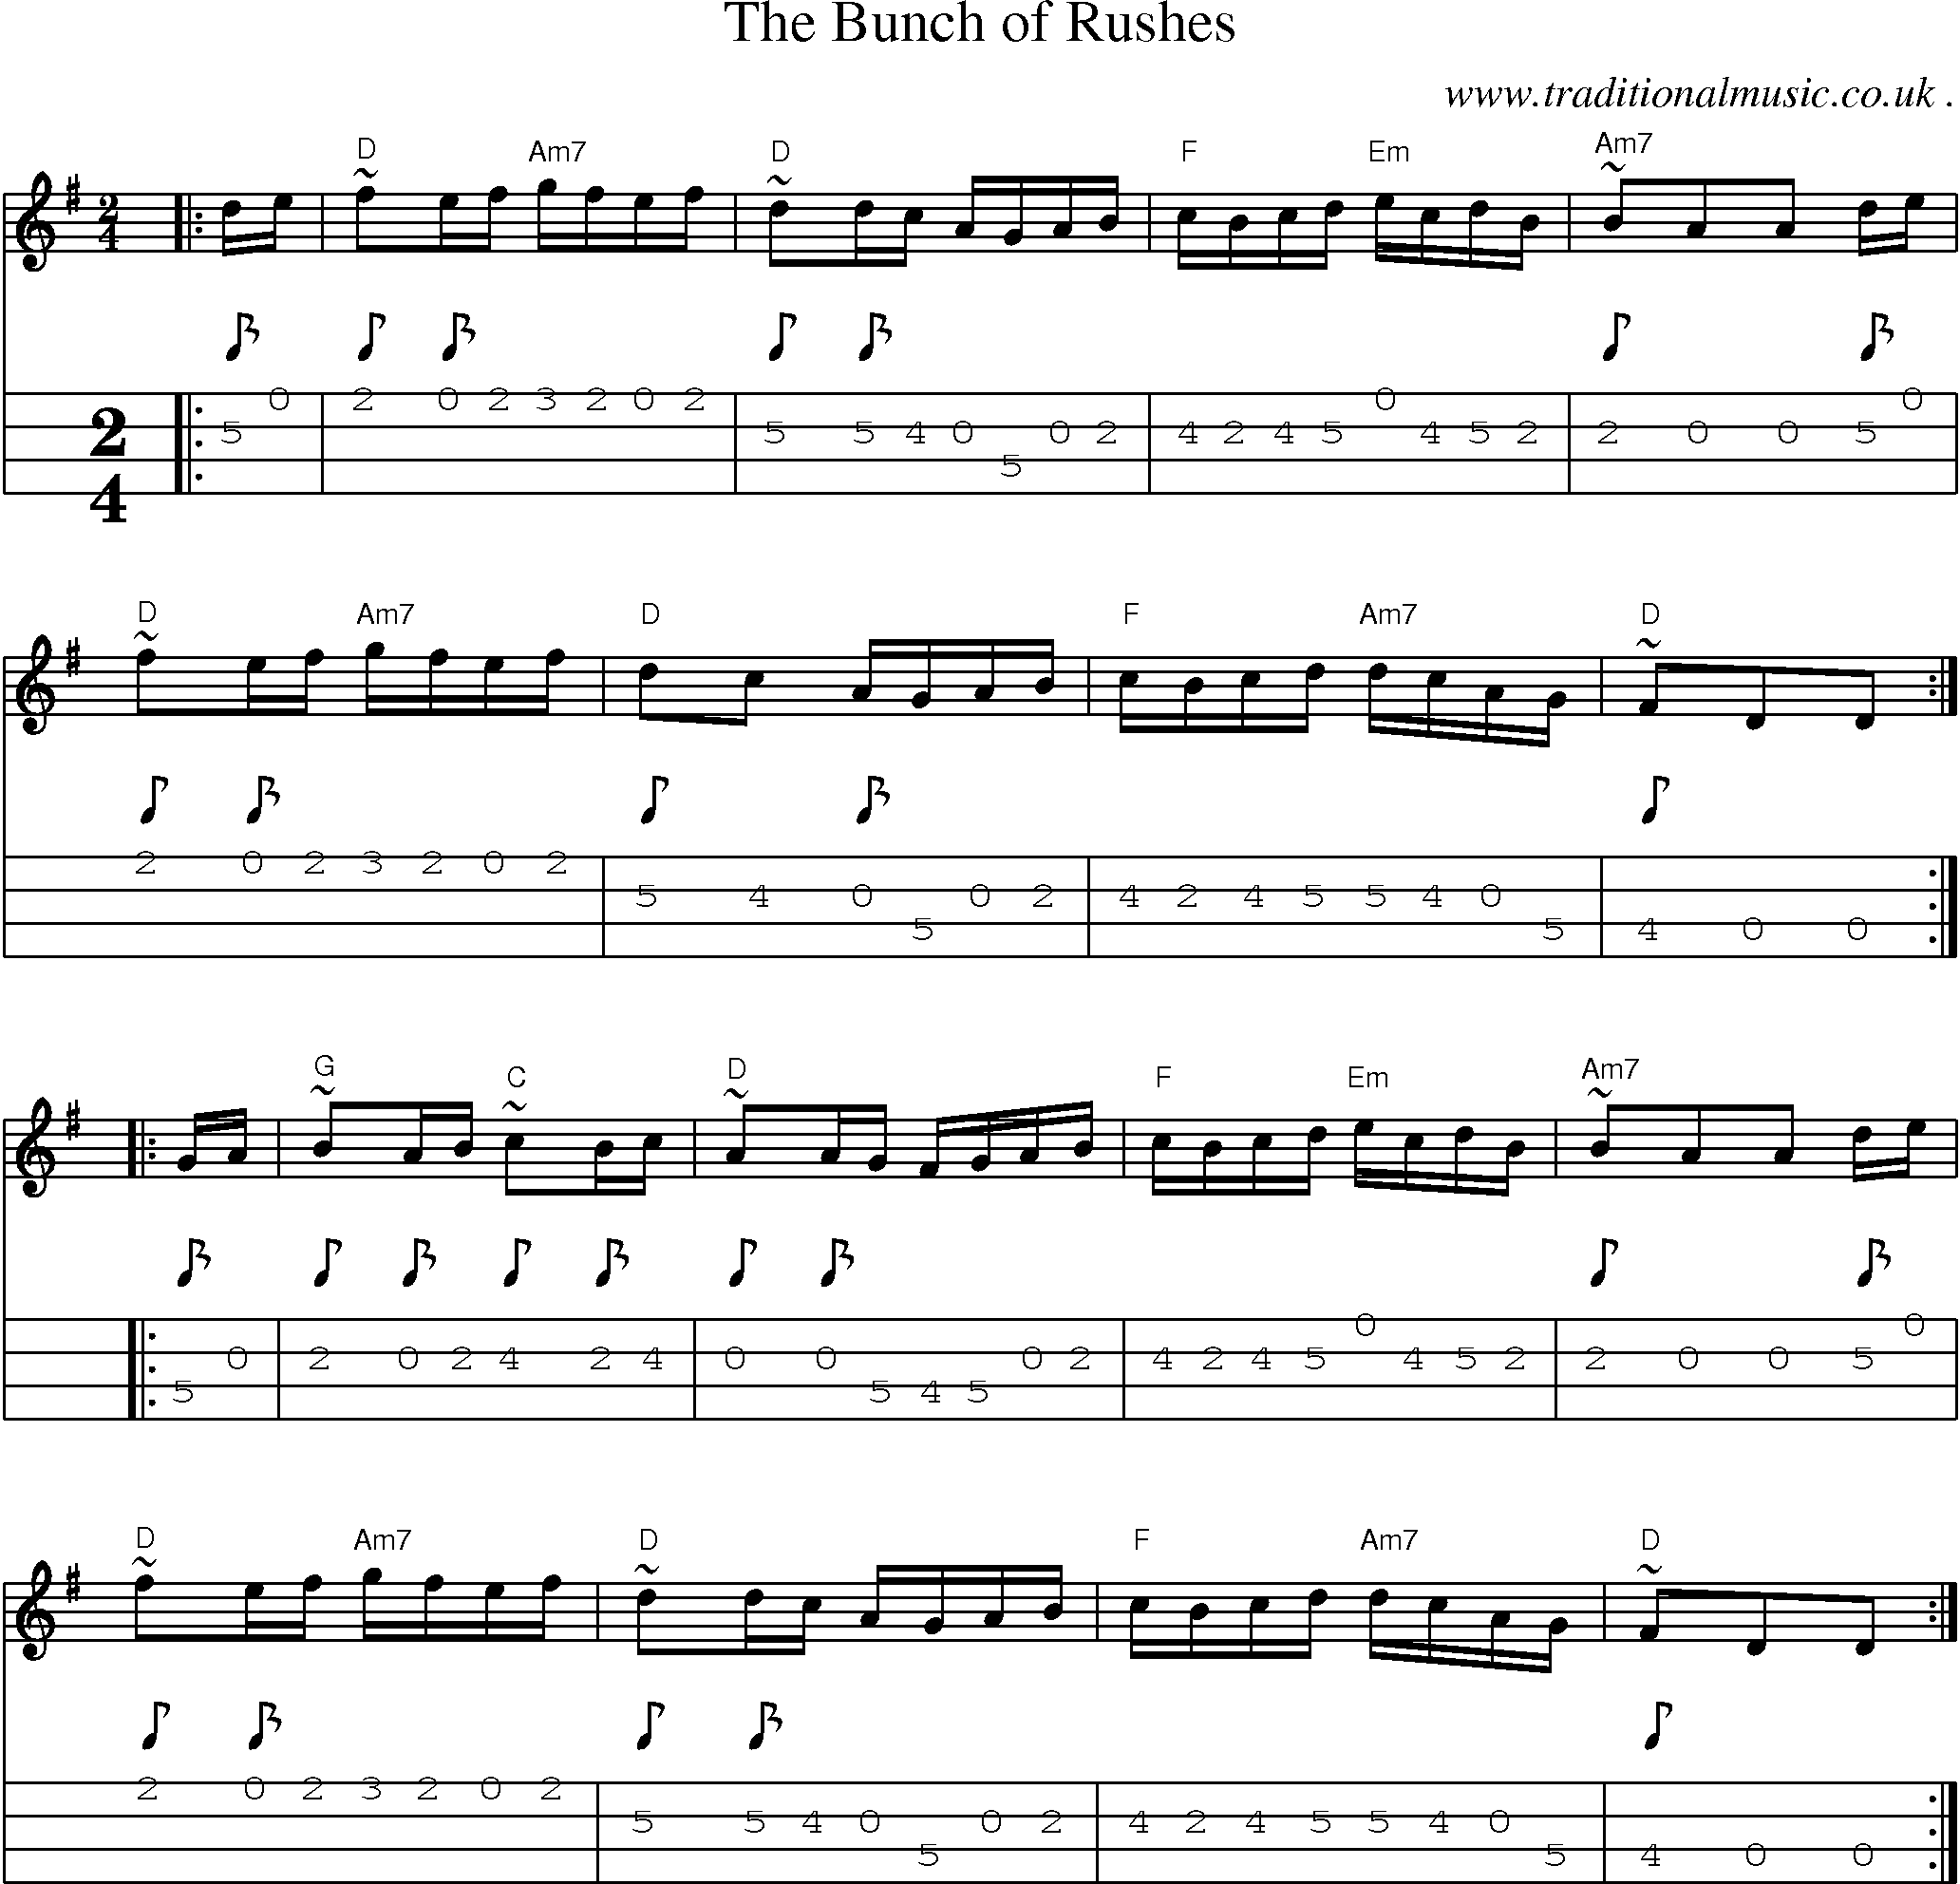 Music Score and Guitar Tabs for The Bunch Of Rushes